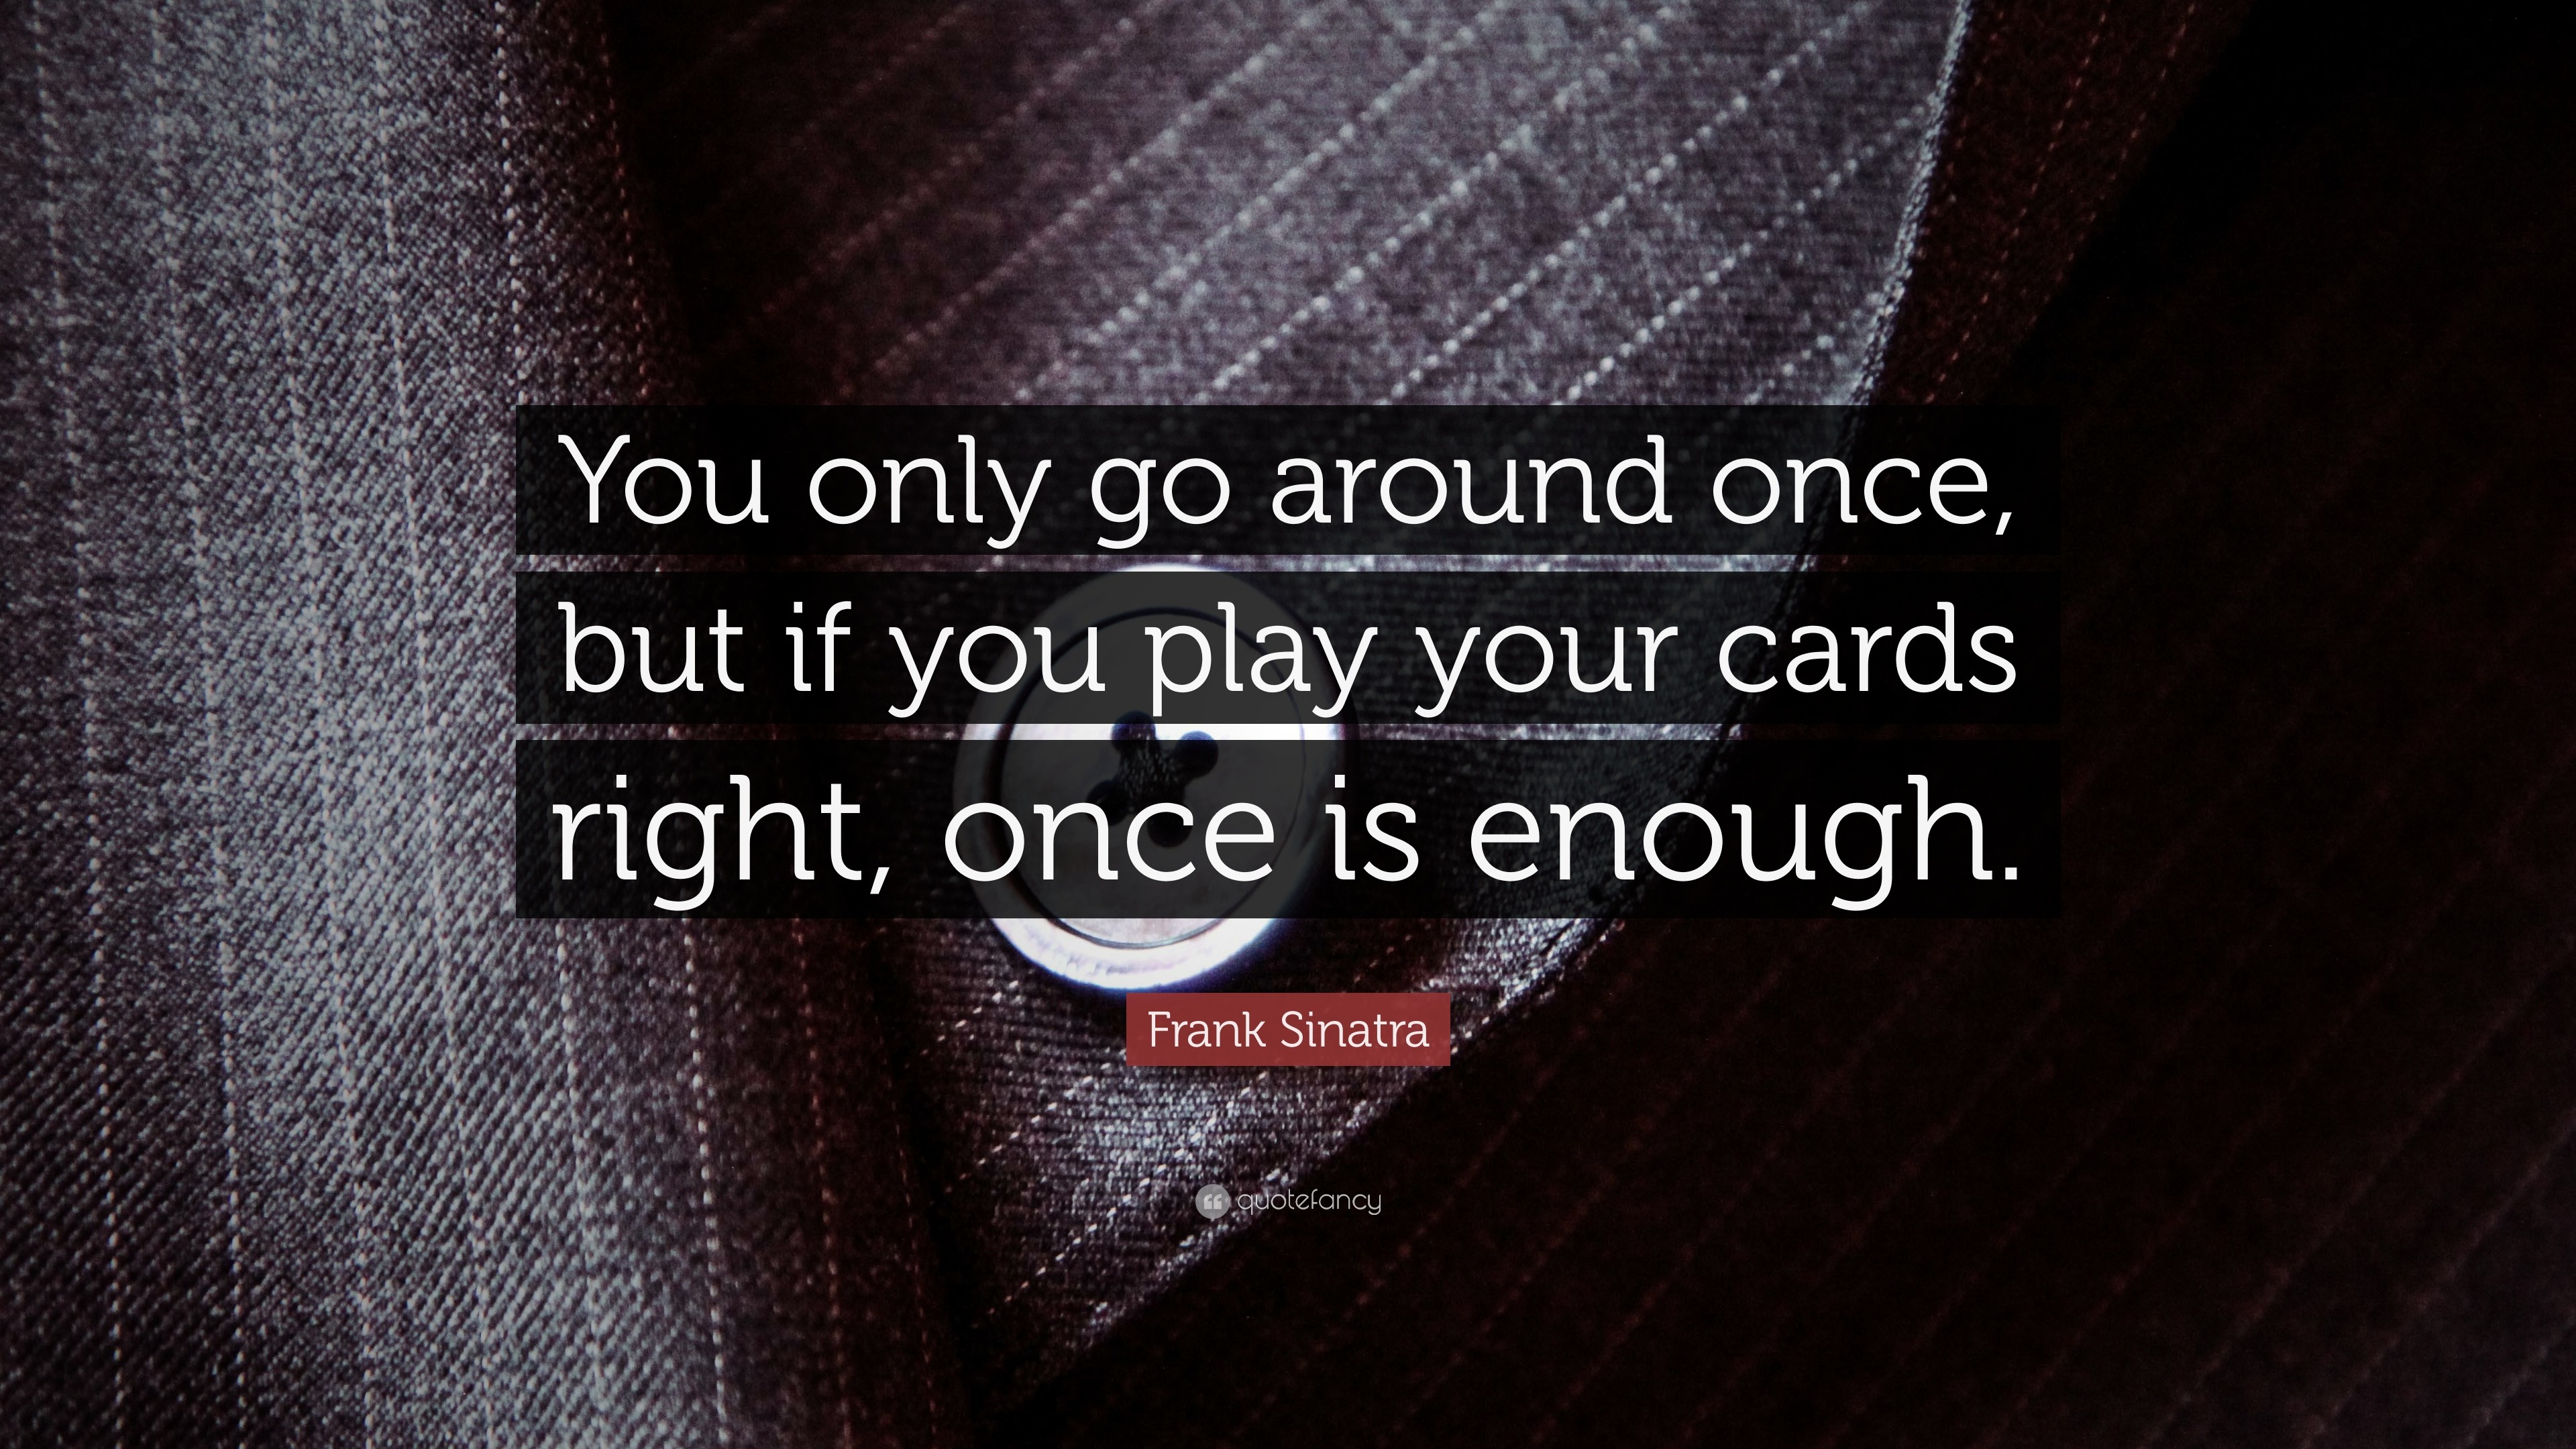 3840x2160 Frank Sinatra Quote: “You only go around once, but if you play your